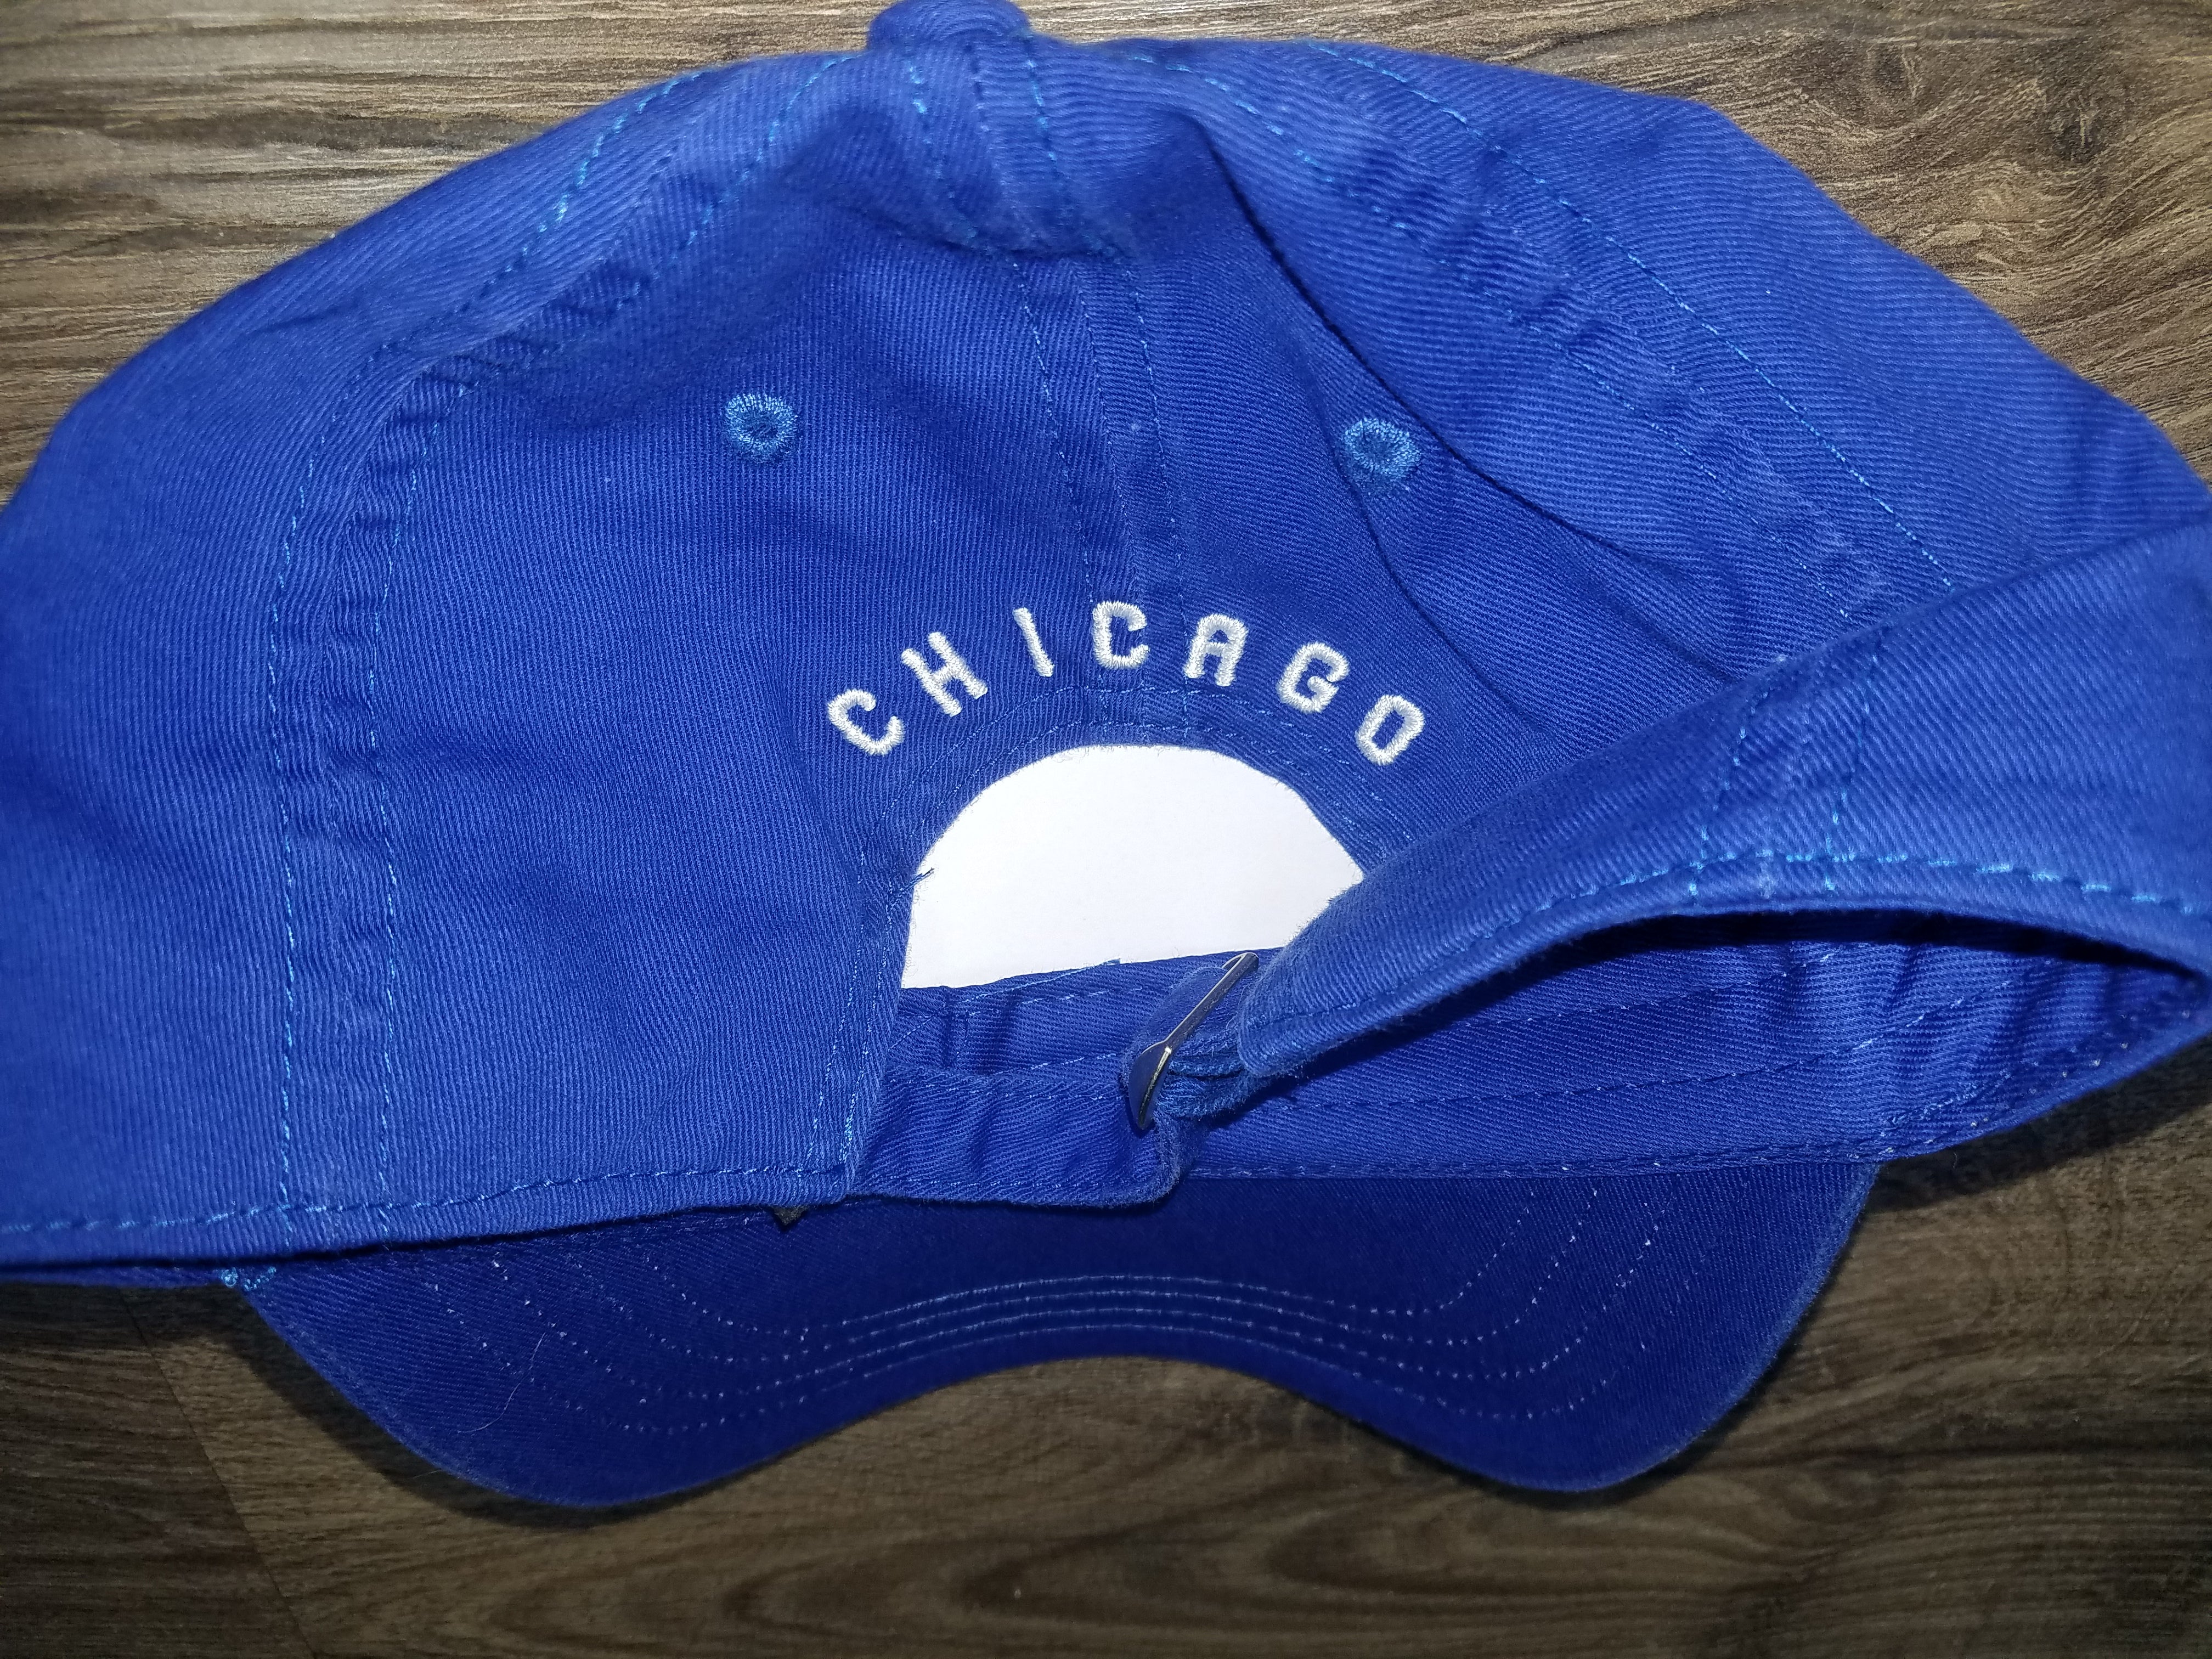 NOTES:  Purchased from the Pearl Jam Merch Tent outside of Wrigley field on August 16, 2018.  Never worn.  Ready to ship!